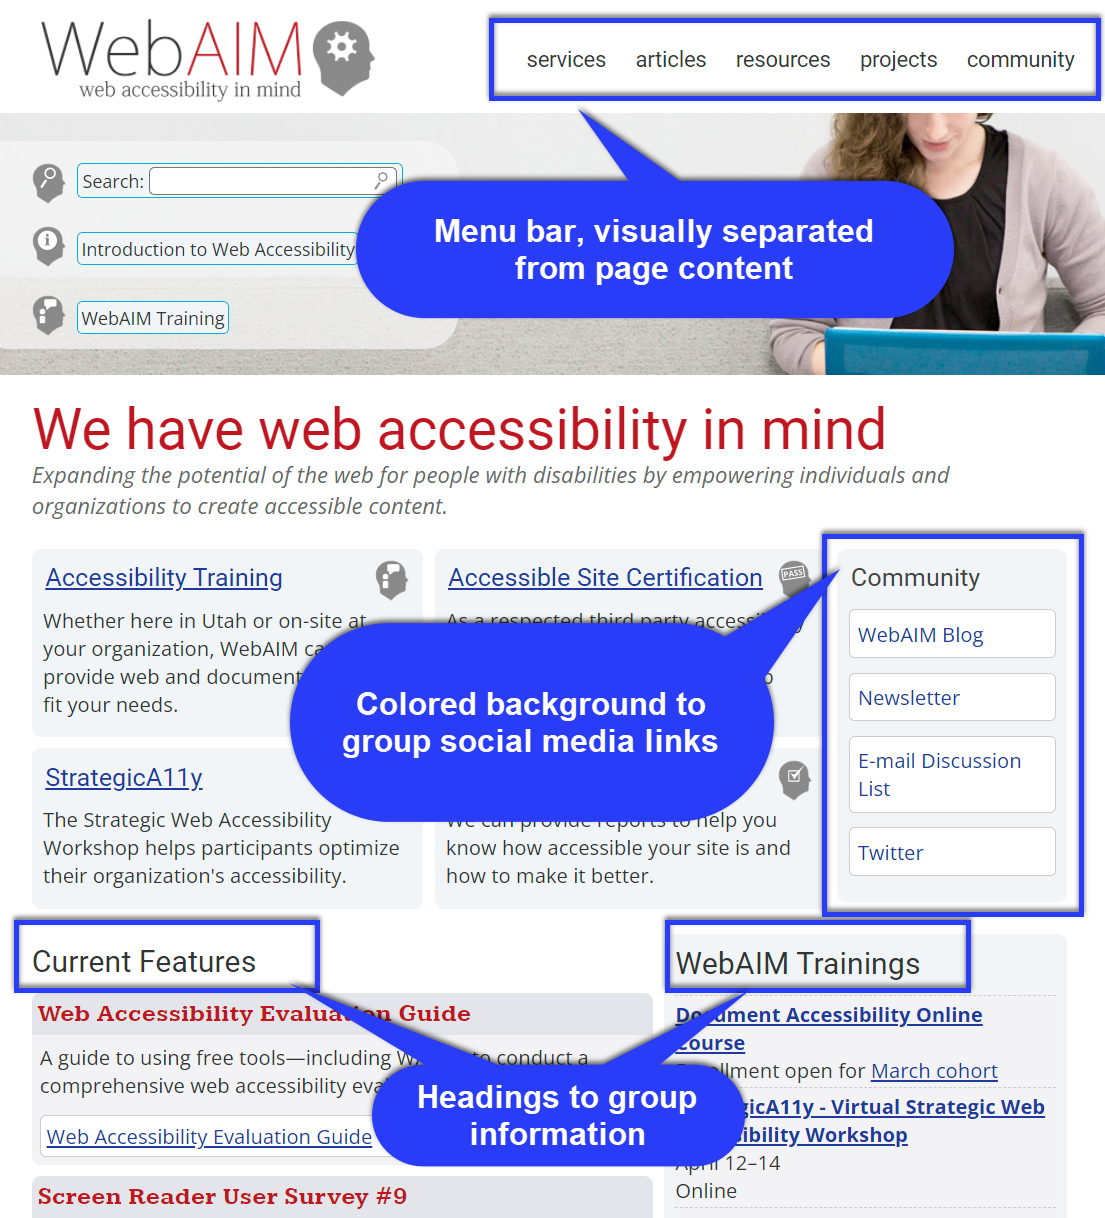 WebAIM home page with its menu bar, colored background to group content together, and headings